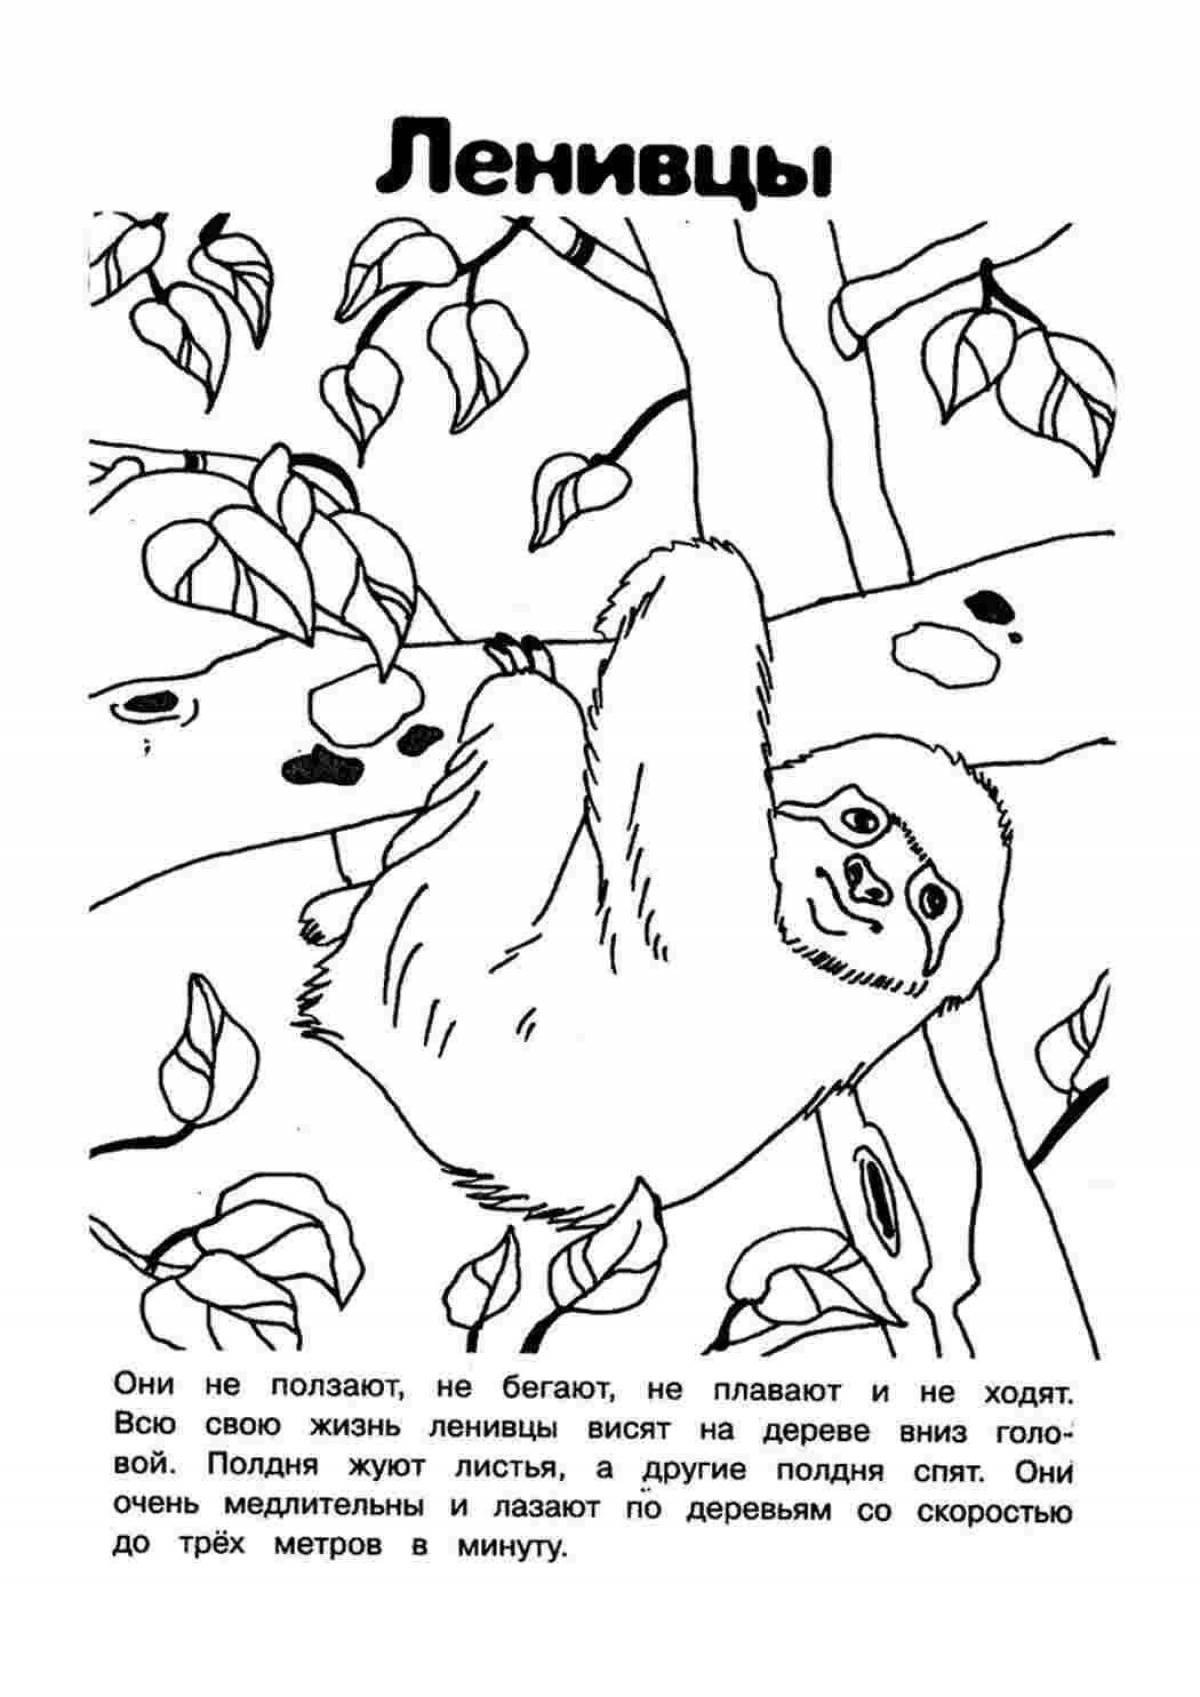 Playful red book animal coloring page for kids